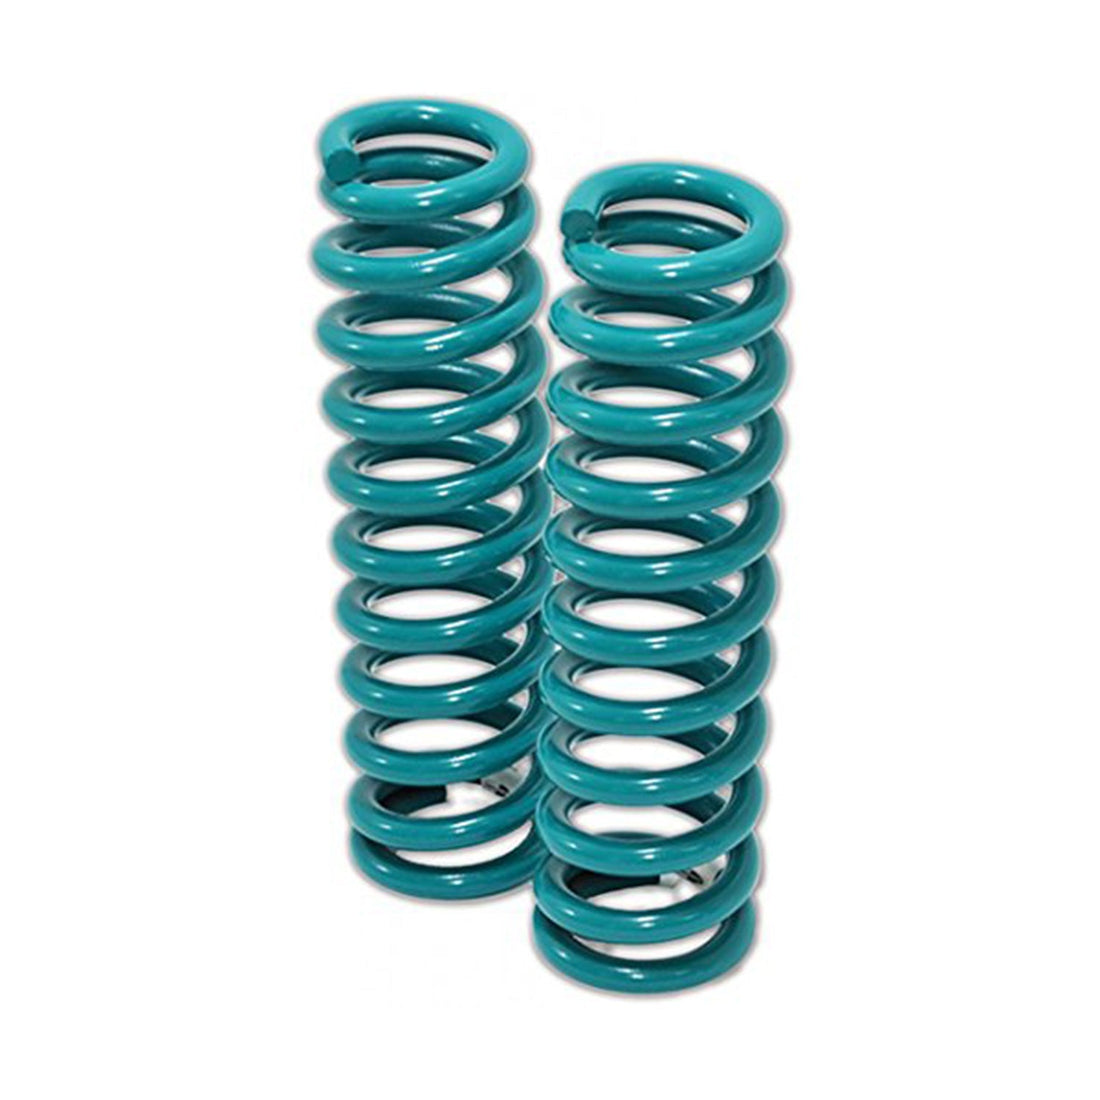 Dobinsons Front Coil Springs for Land Rover vehicles  (C51-014)